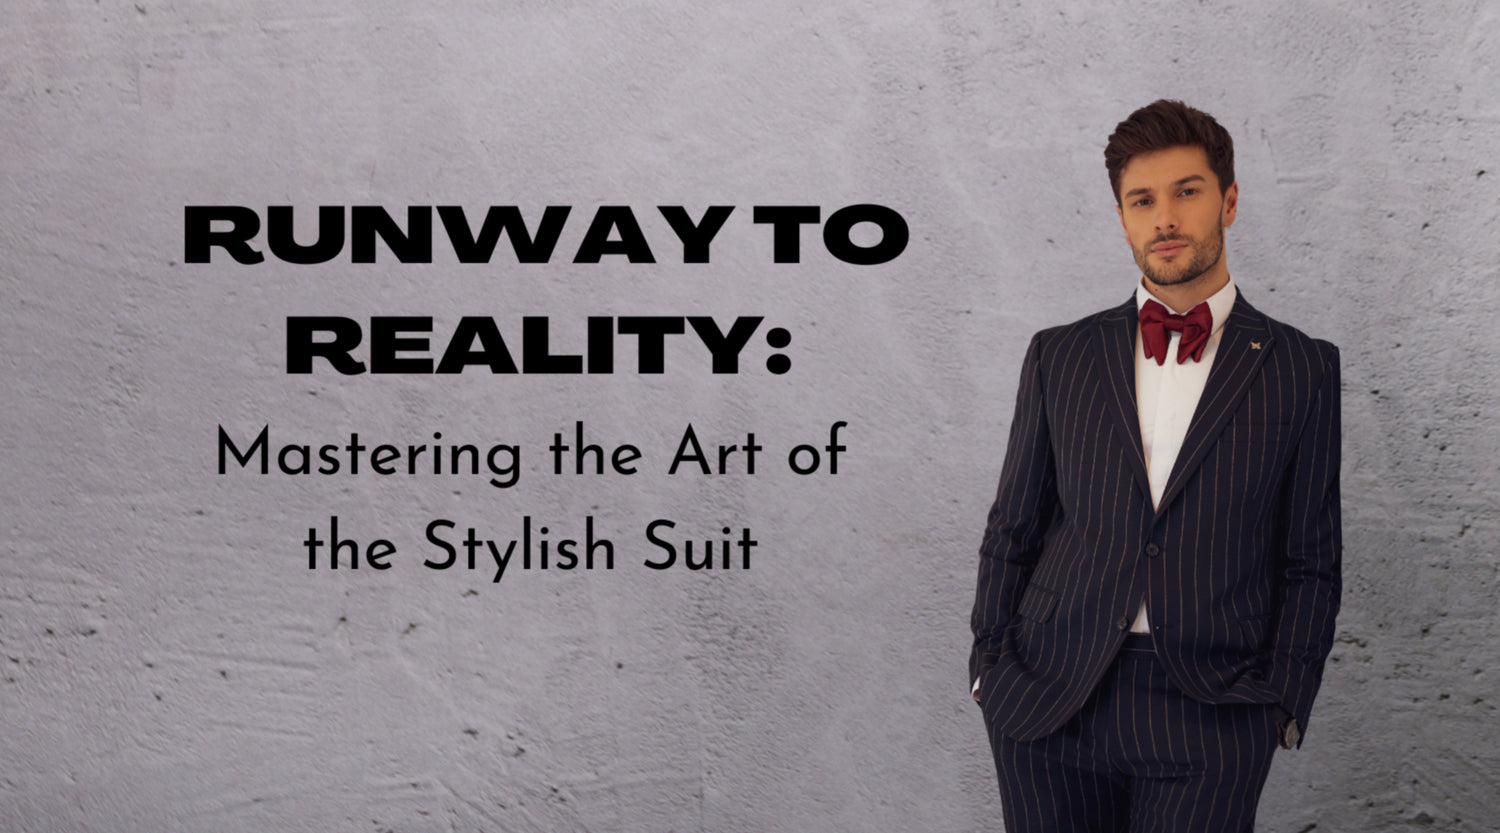 Runway to Reality: Mastering the Art of the Stylish Suit